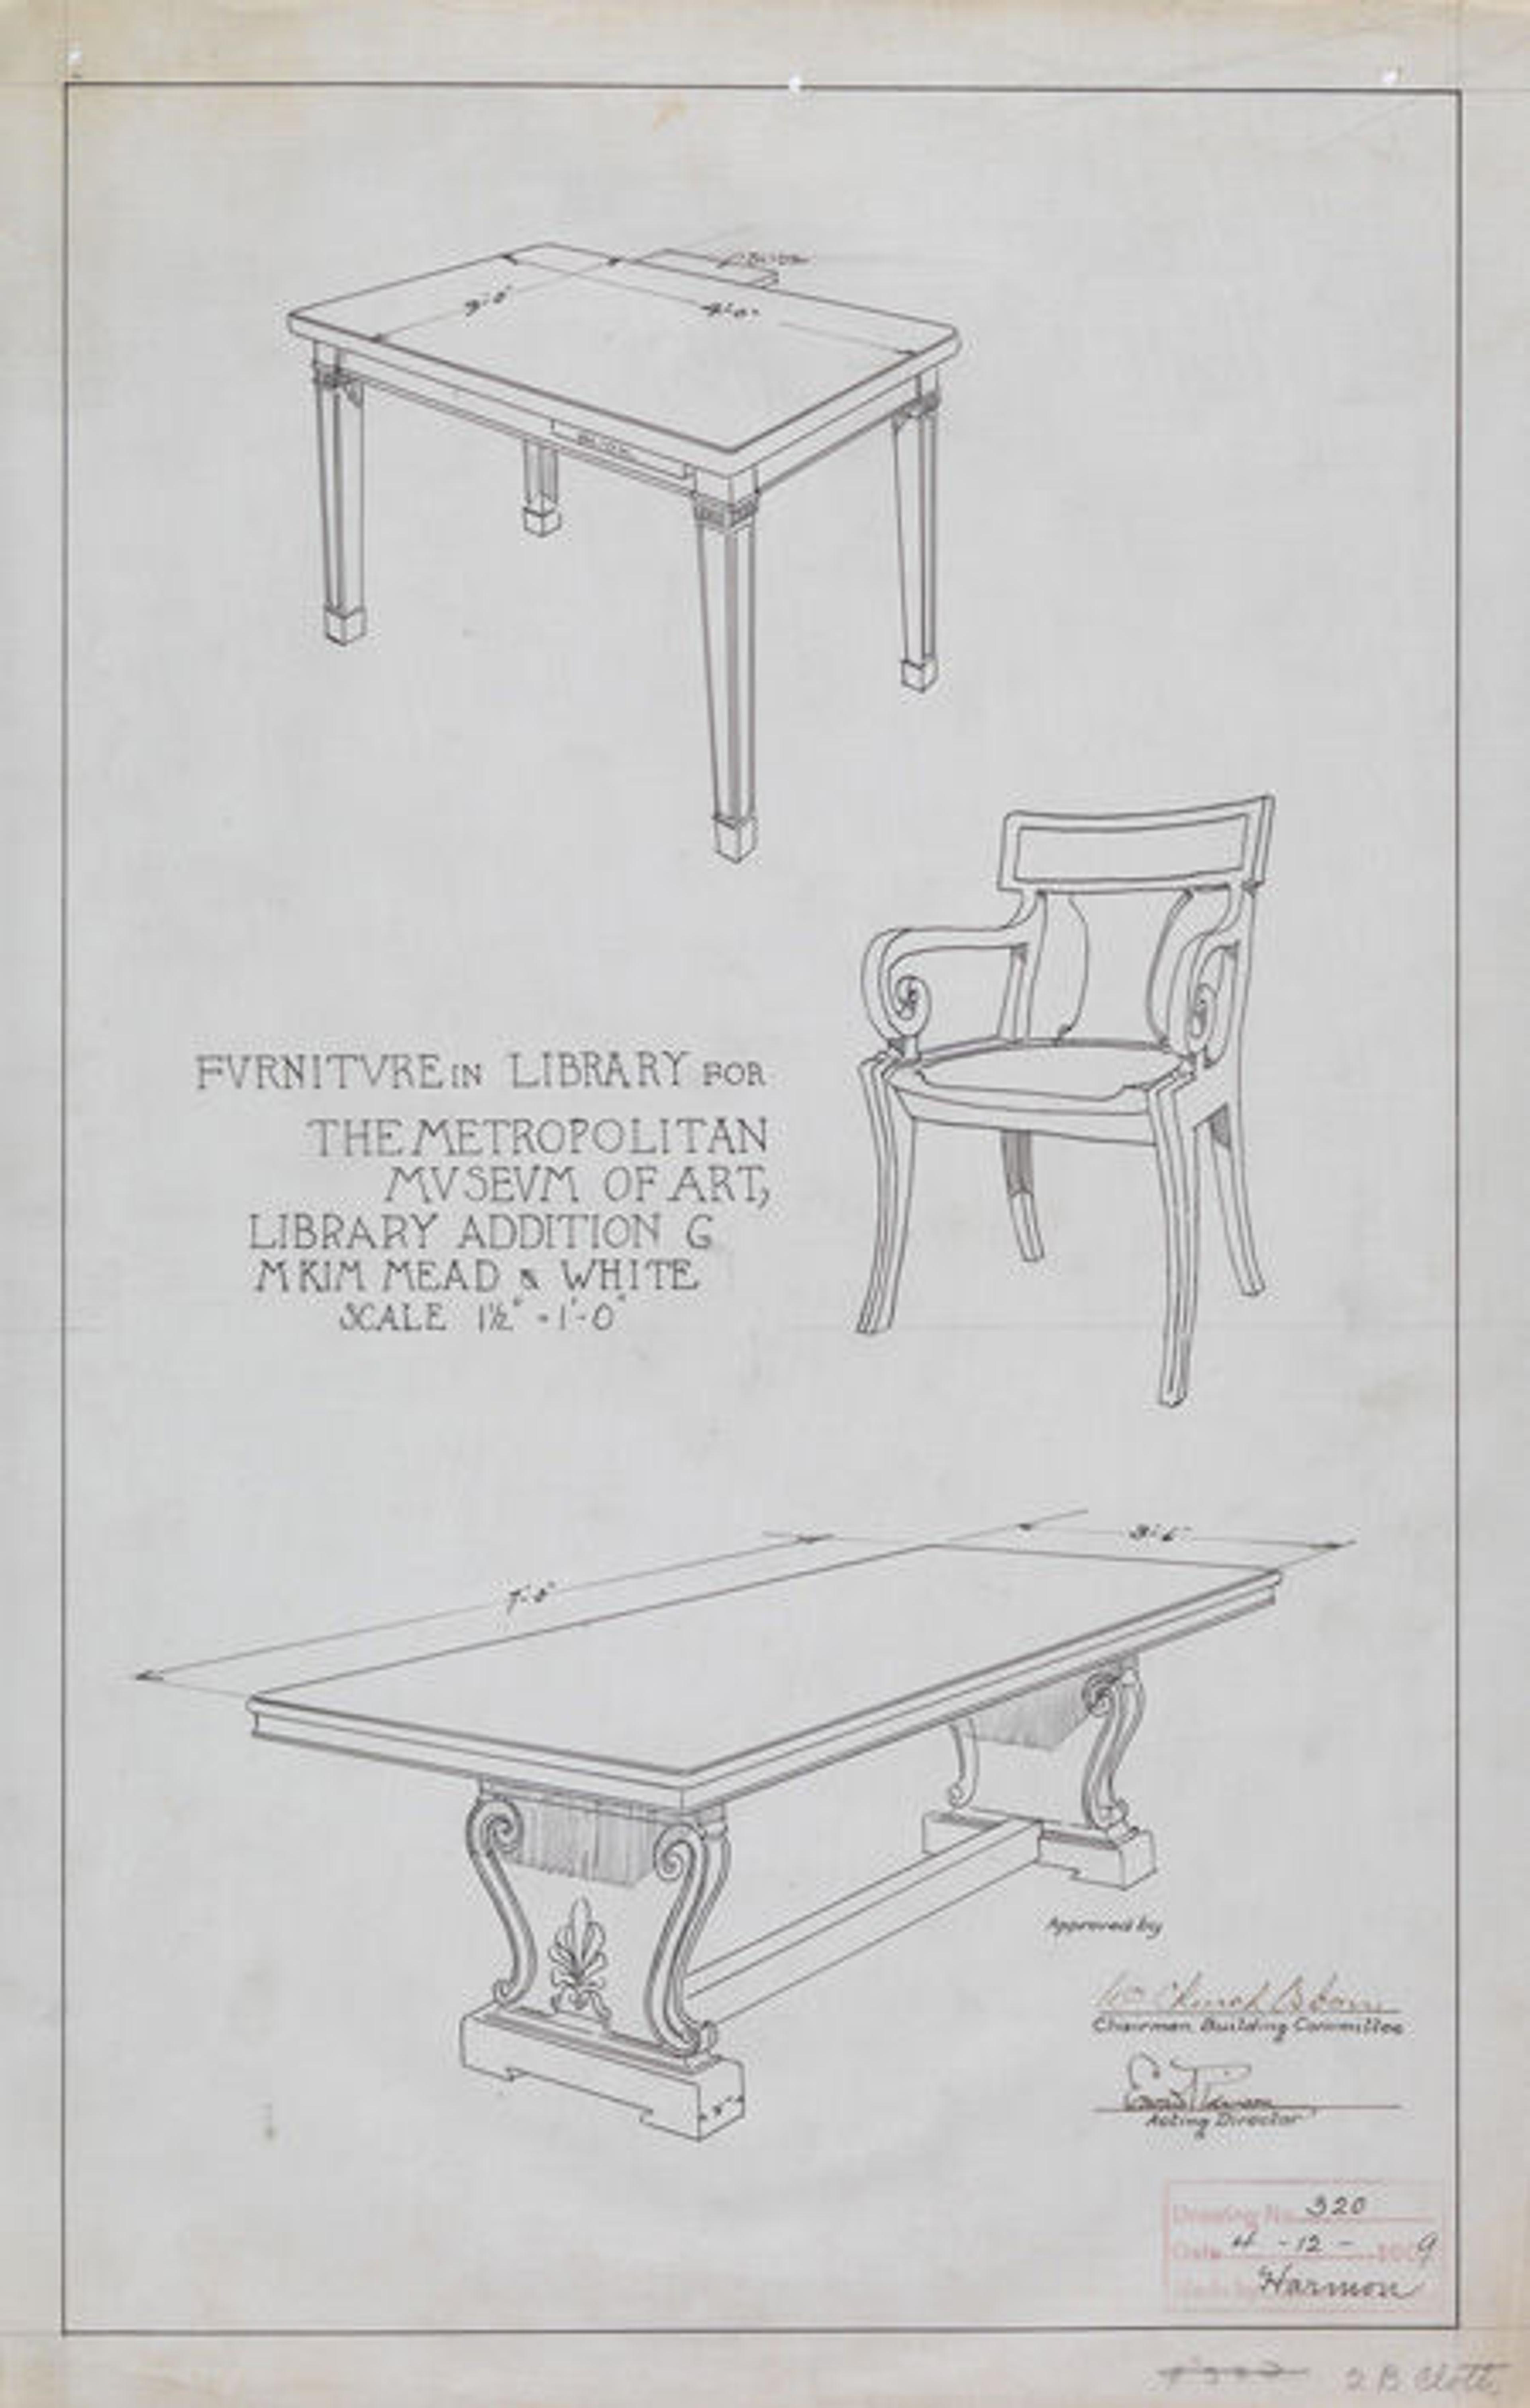 1910 design drawings for library furniture